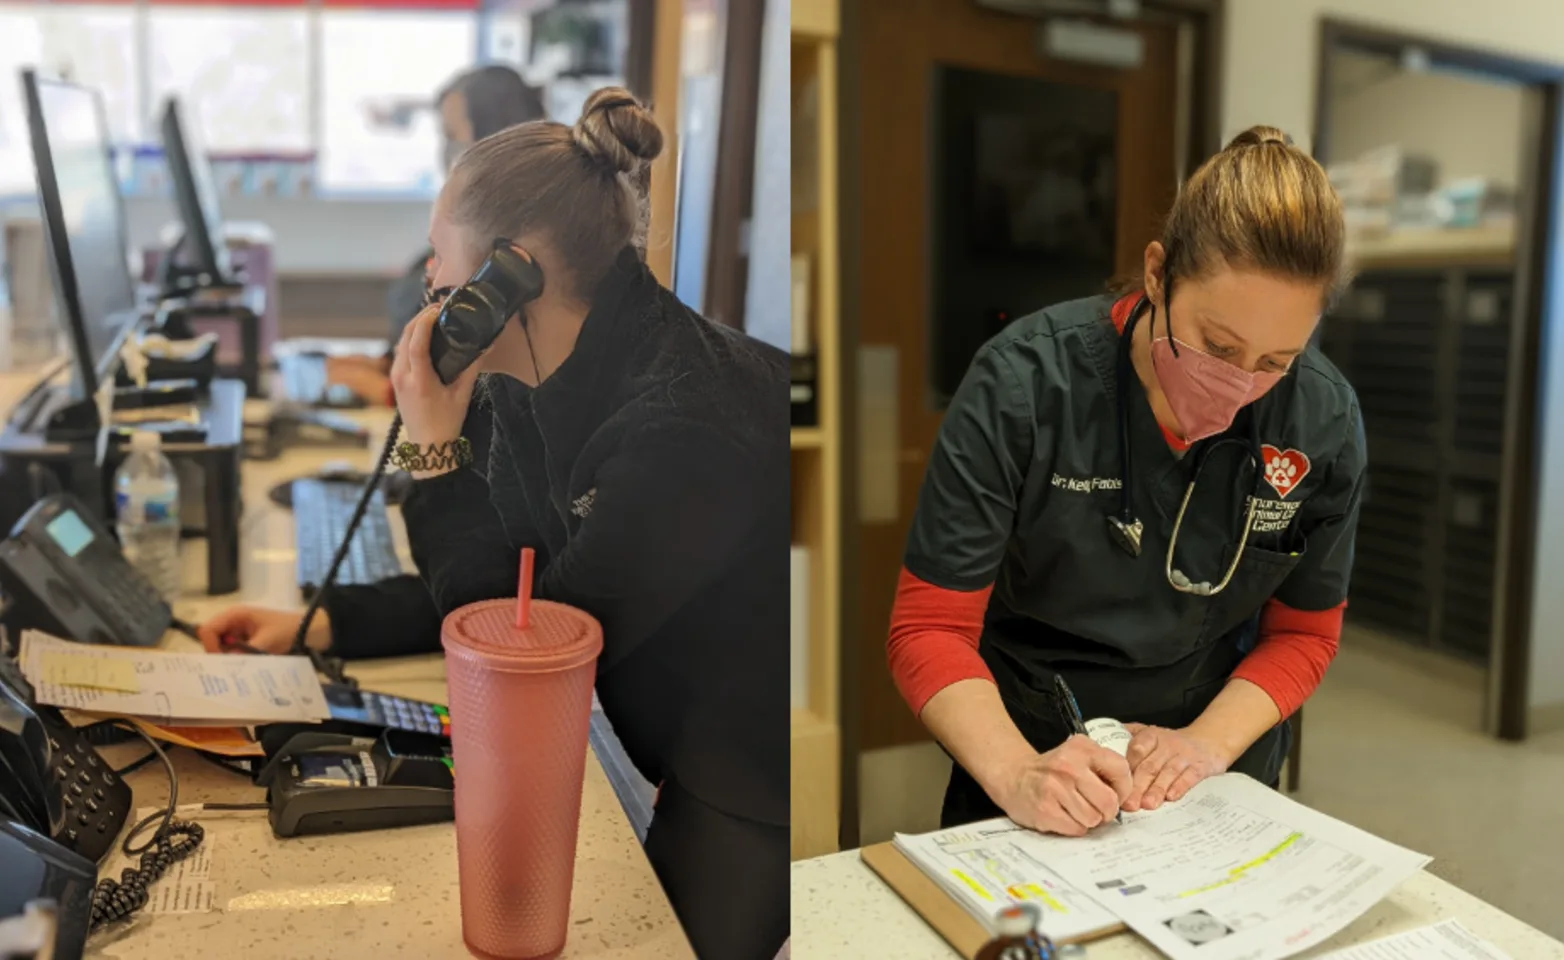 Staff members working at Animal Care Center of Shorewood